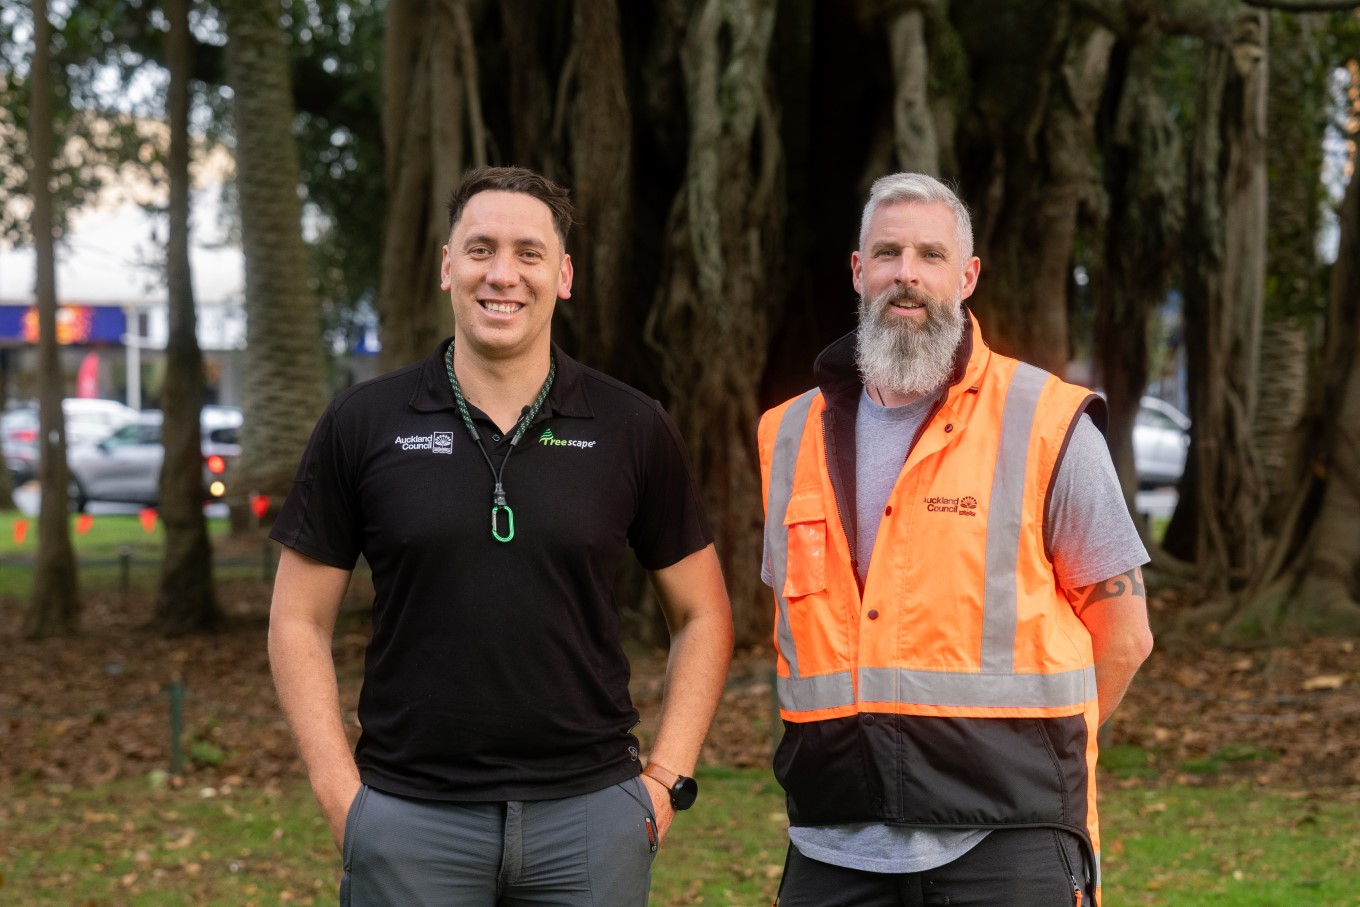 Arborist Adrie Weuring and Rich Ashlin (Auckland Council Senior Arborist Parks and Community Facilities) encourage others to join the arboriculture industry.